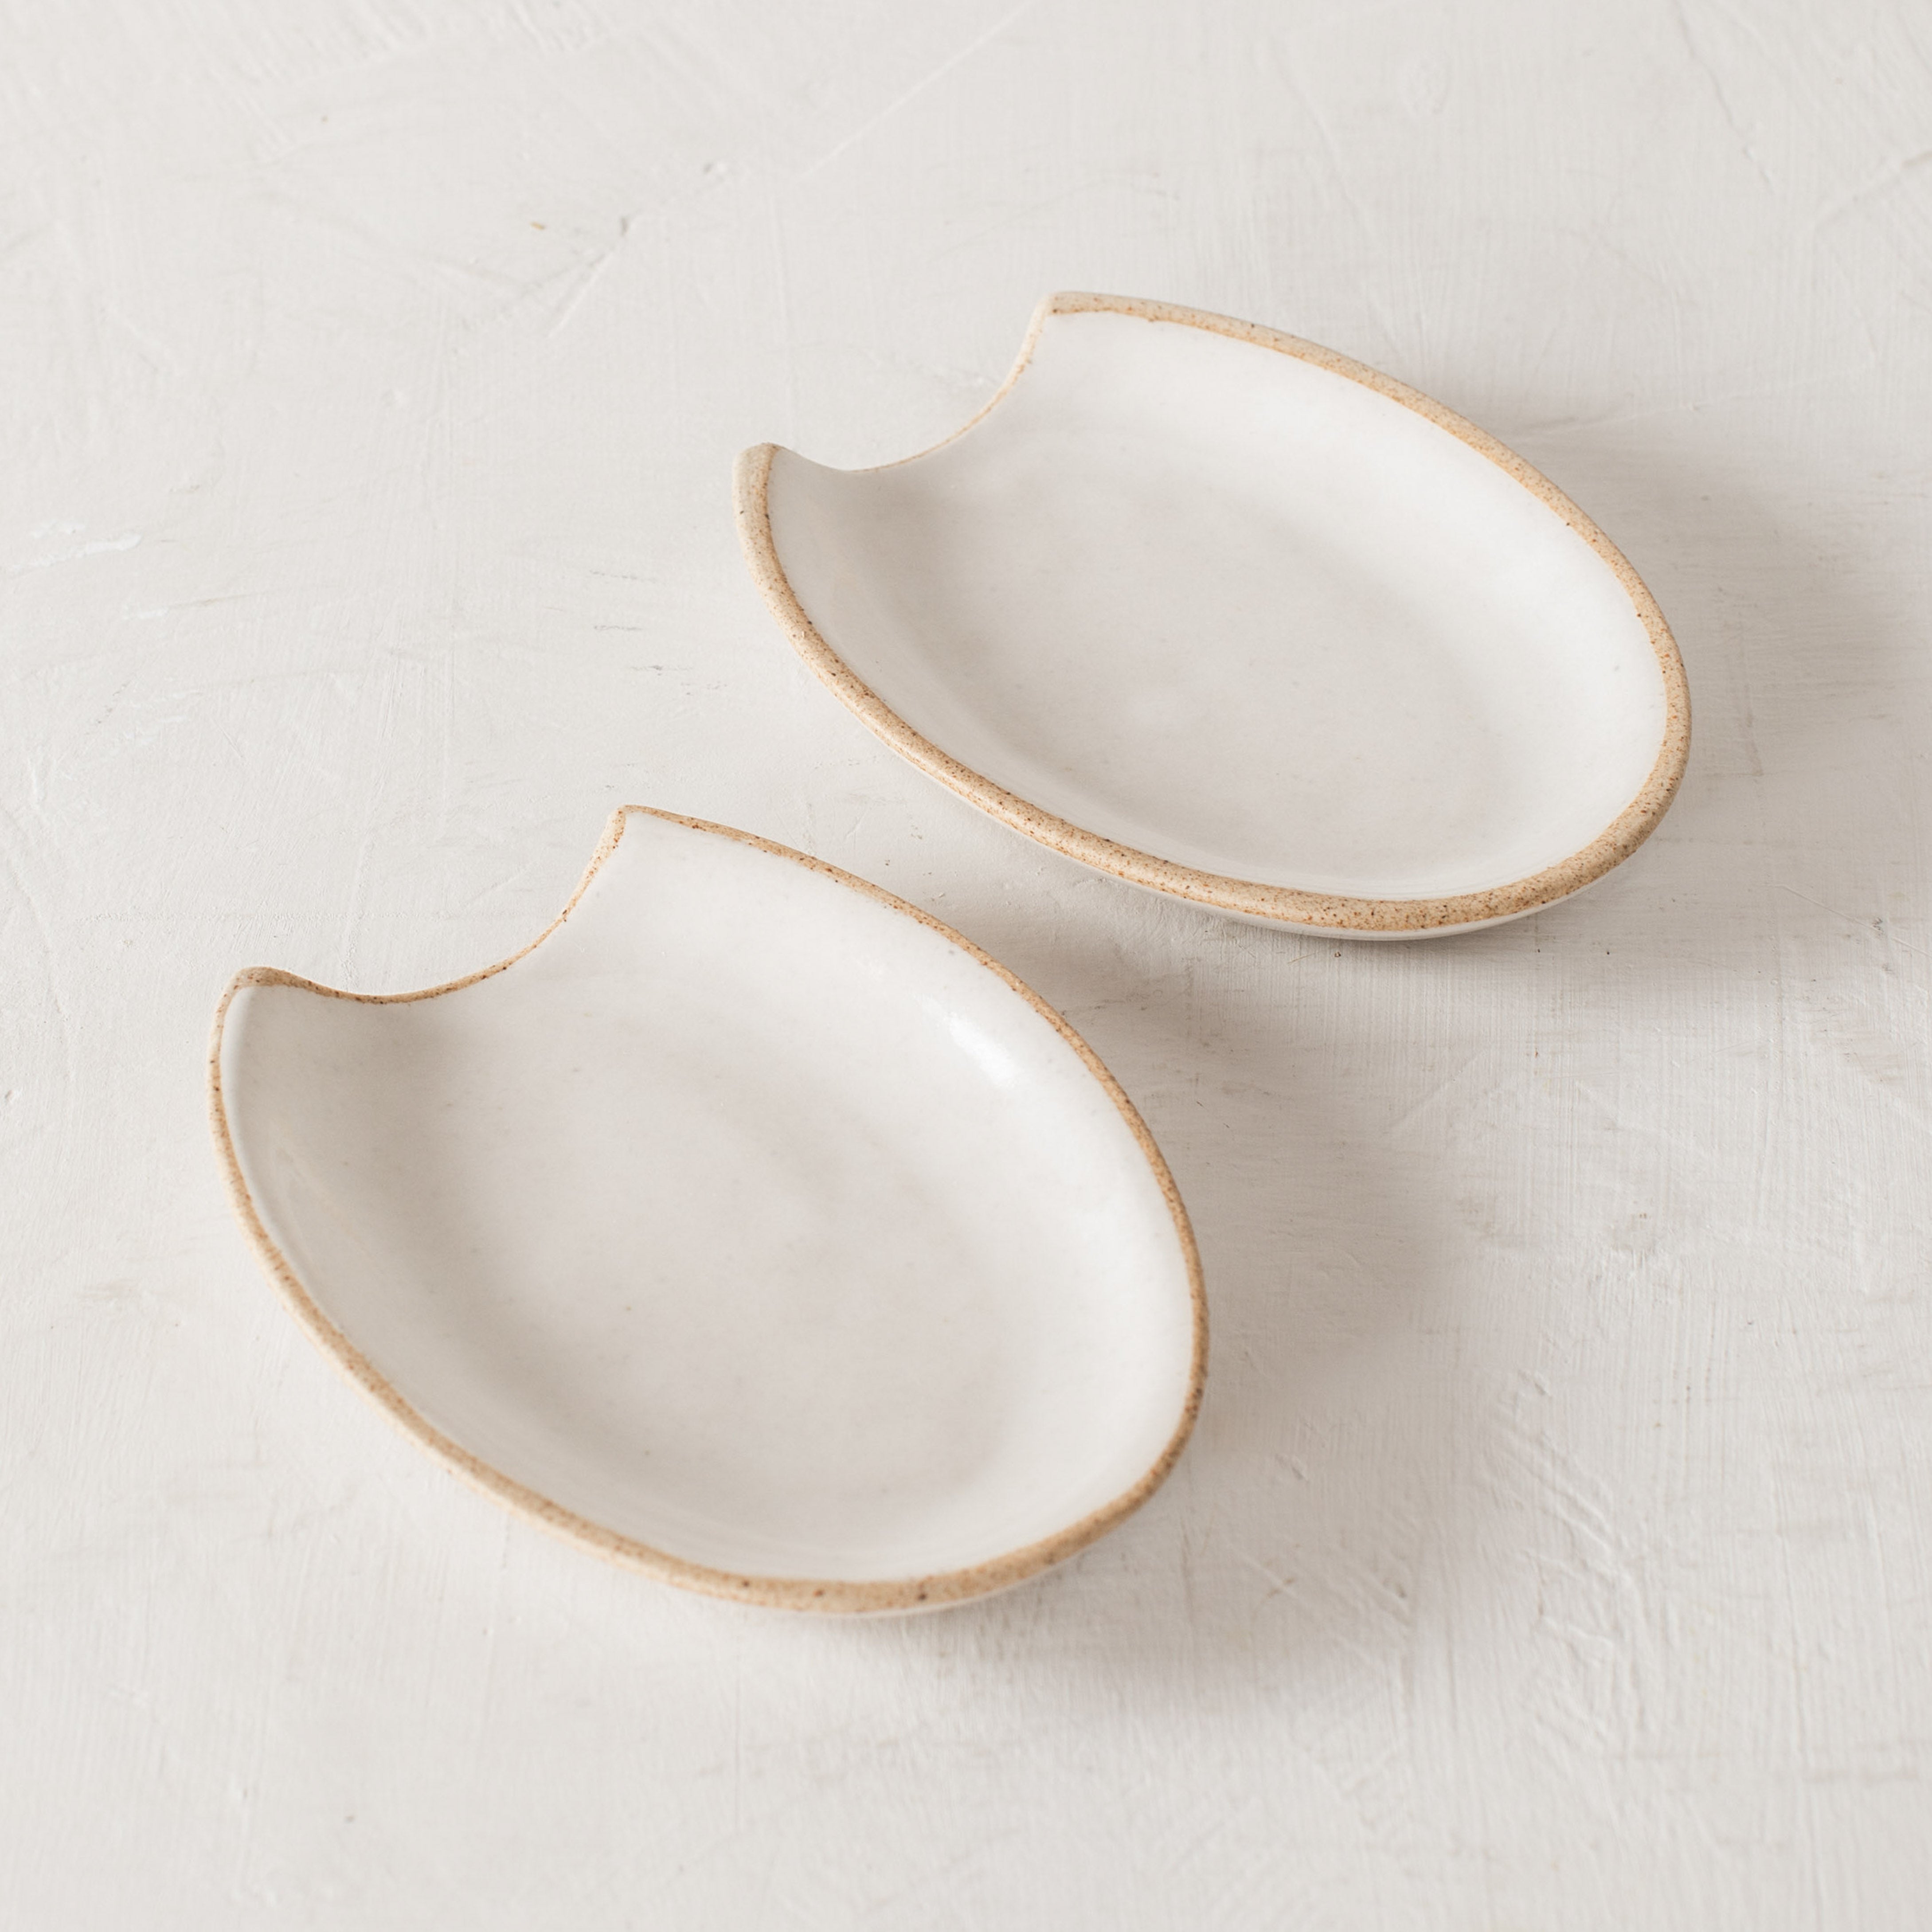 Two arch shaped ceramic spoon rests side by side. Image from above, white minimal arched shaped with an exposed rim. Handmade ceramic spoon rest designed and sold by Convivial Production, Kansas City ceramics.